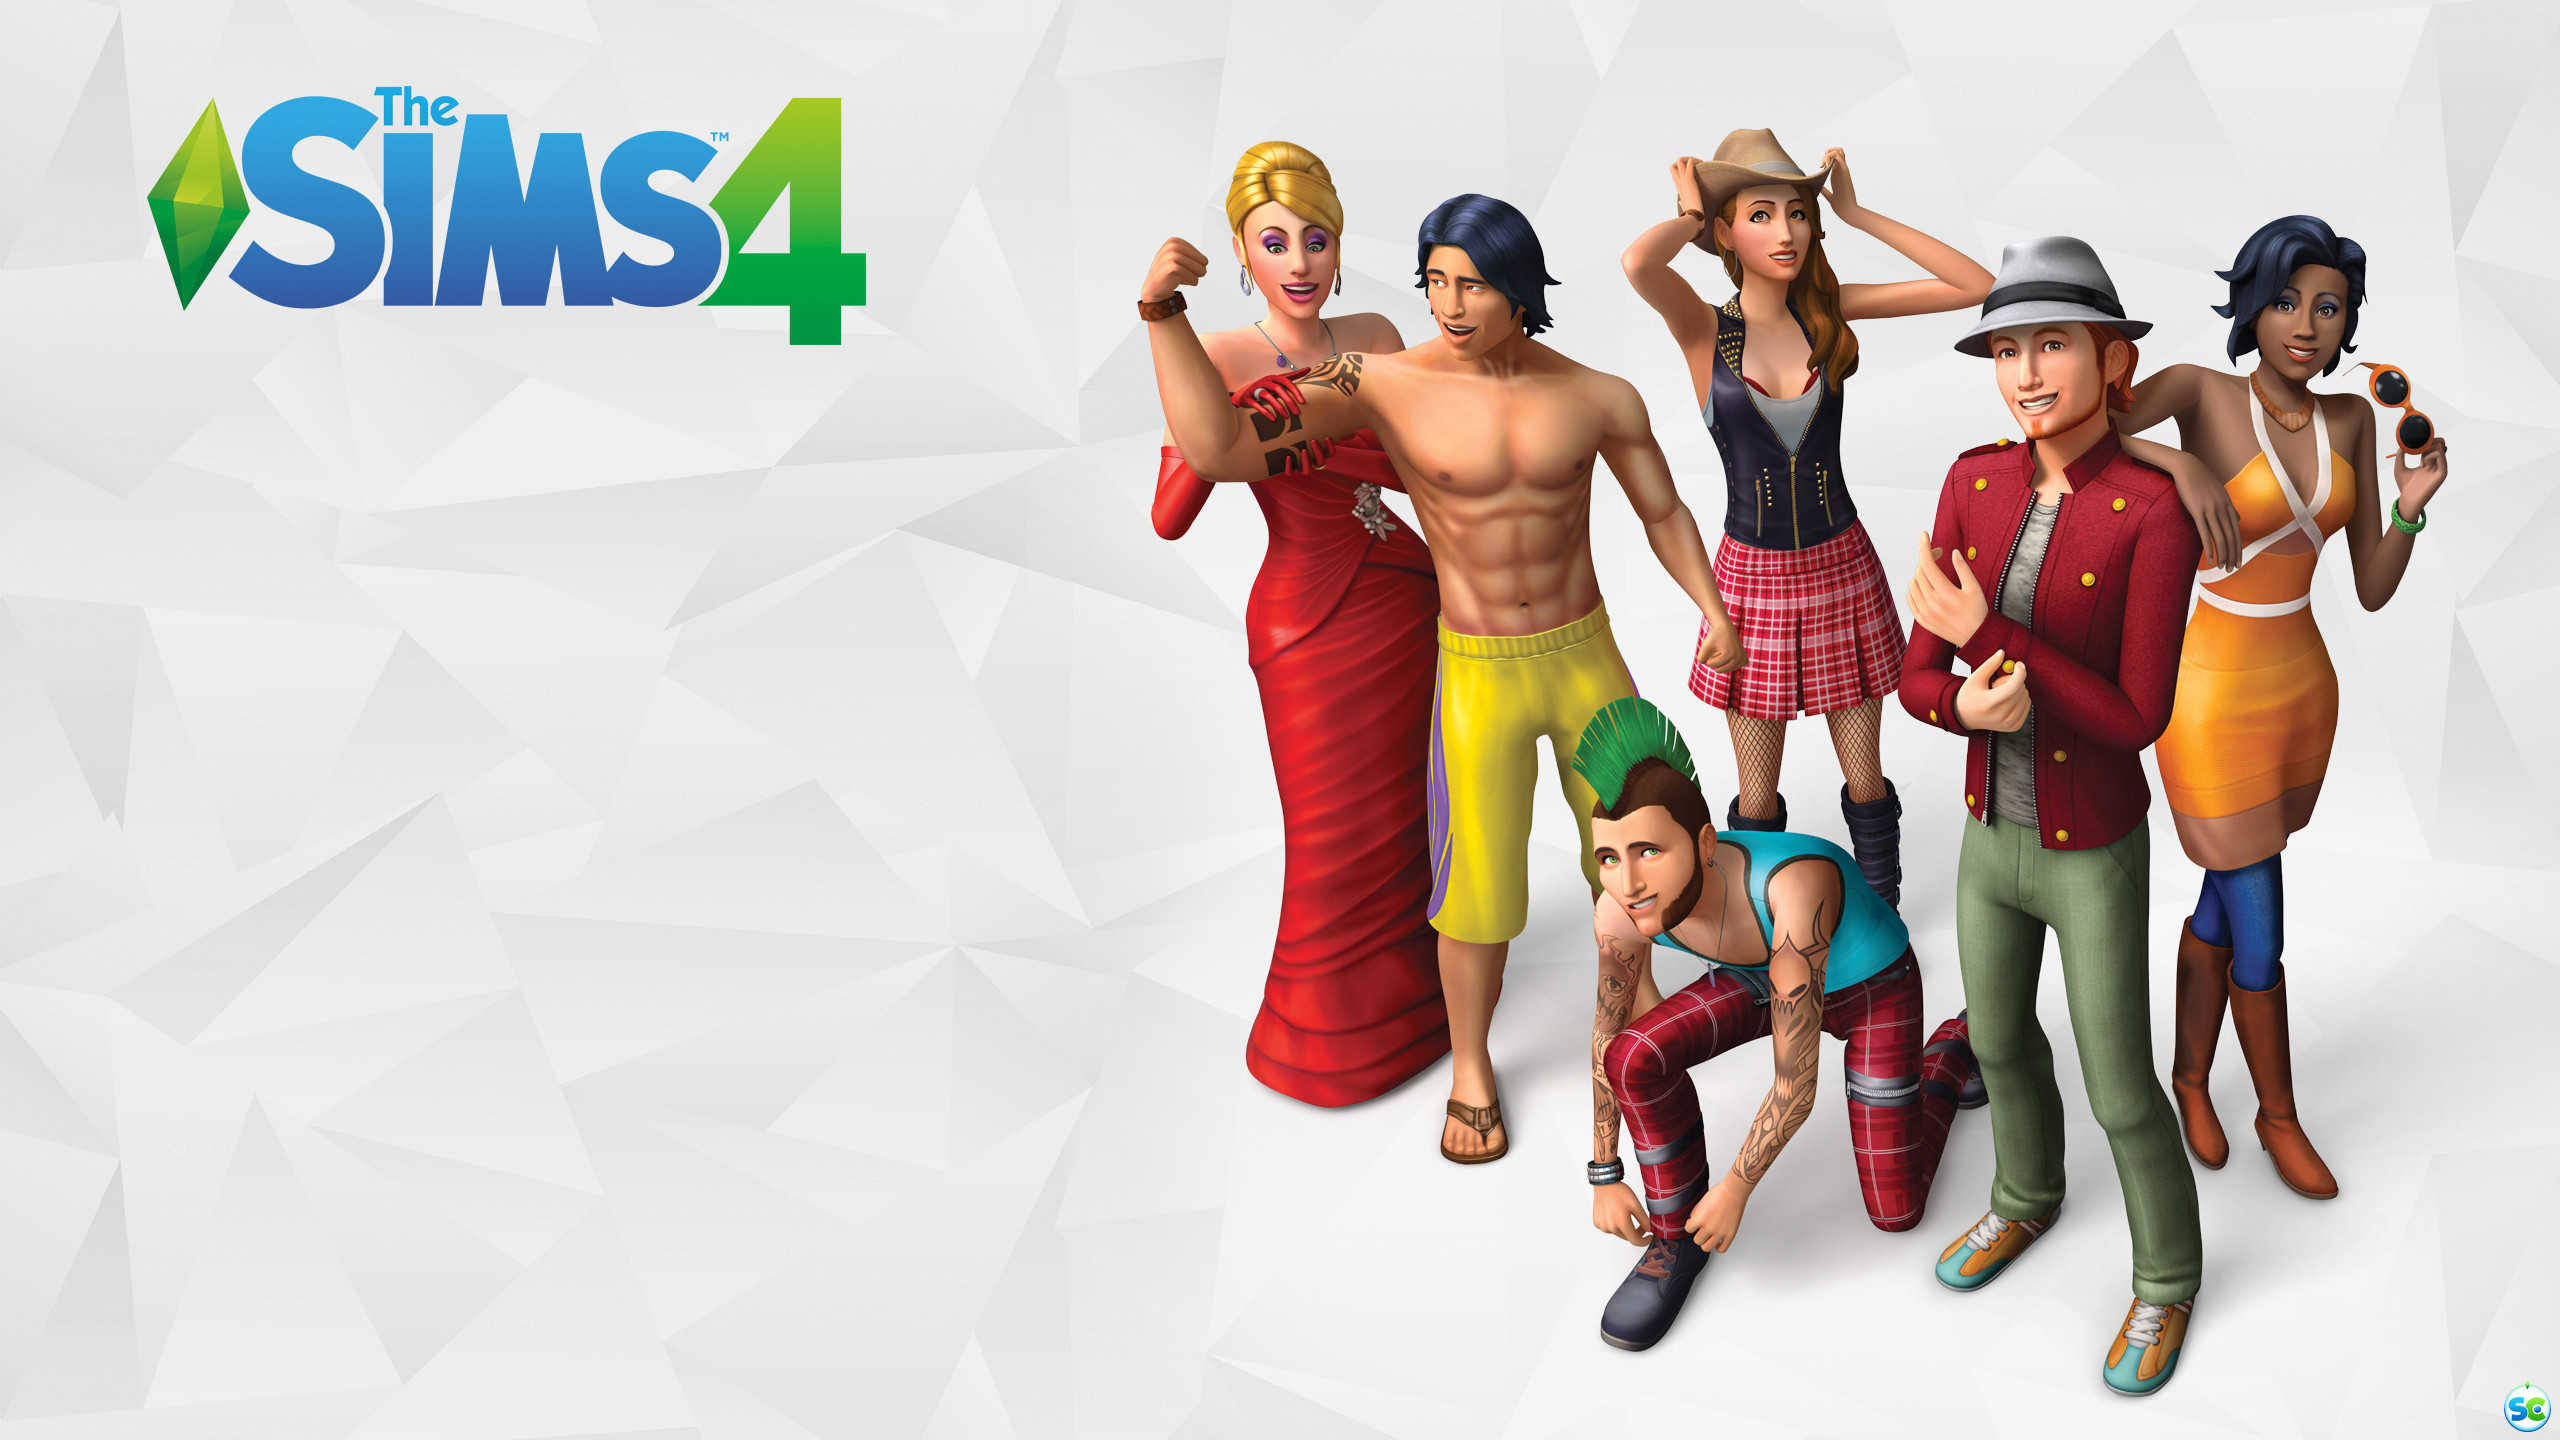 Sims from steam to origin фото 37